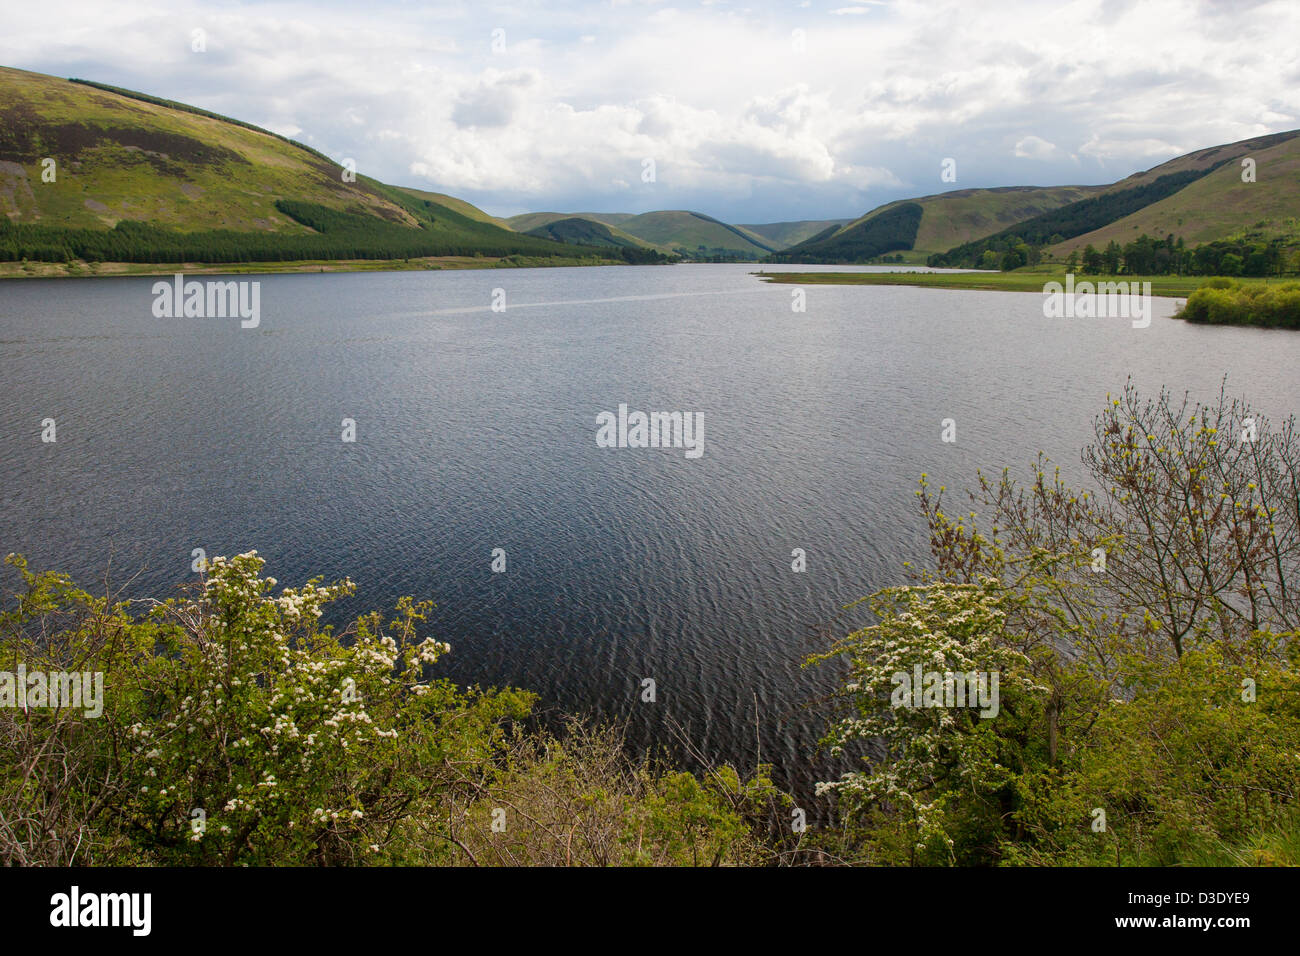 Loch of the Lowes, near Dunkeld in Perth and Kinross, Scotland. Stock Photo